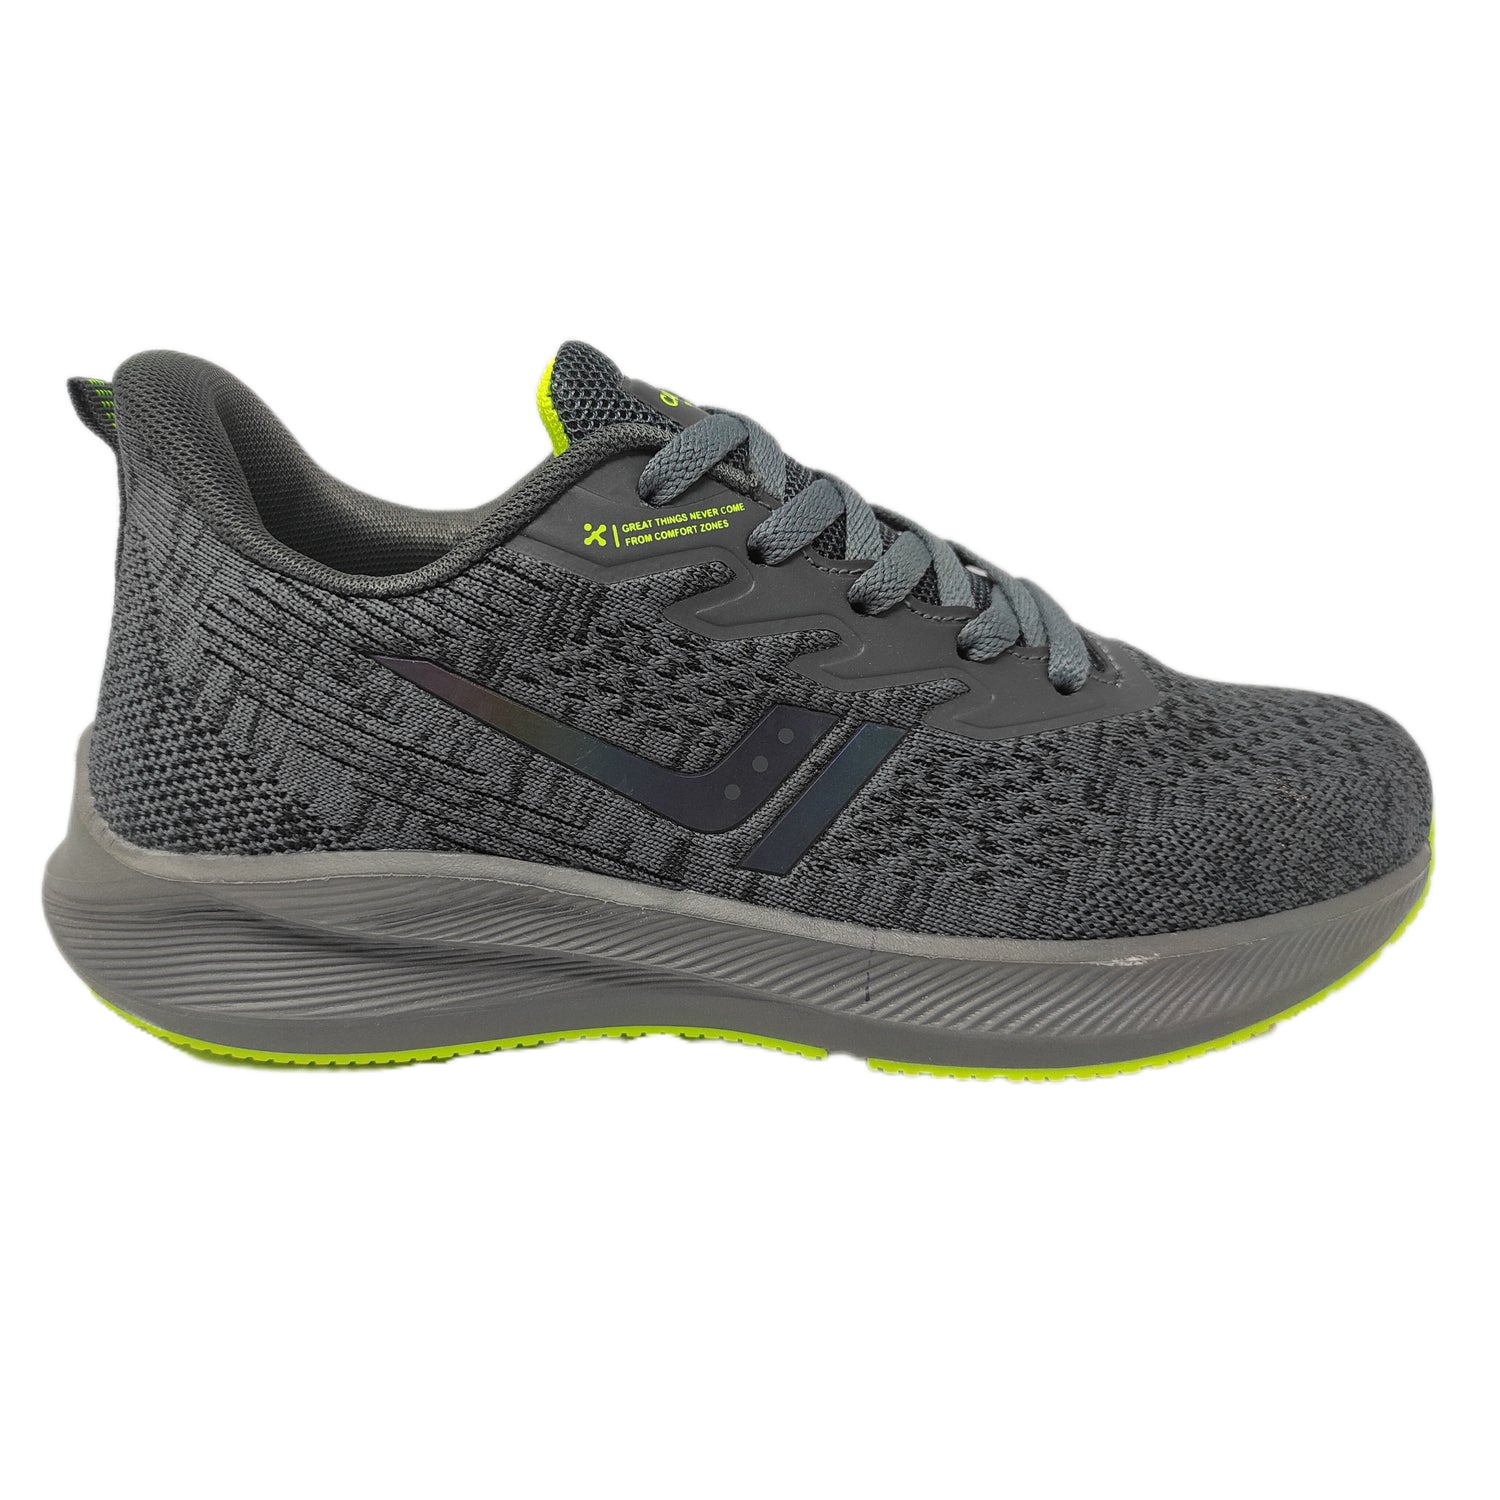 Calcetto CLT-0964 D Grey Lime Running Shoe For Men